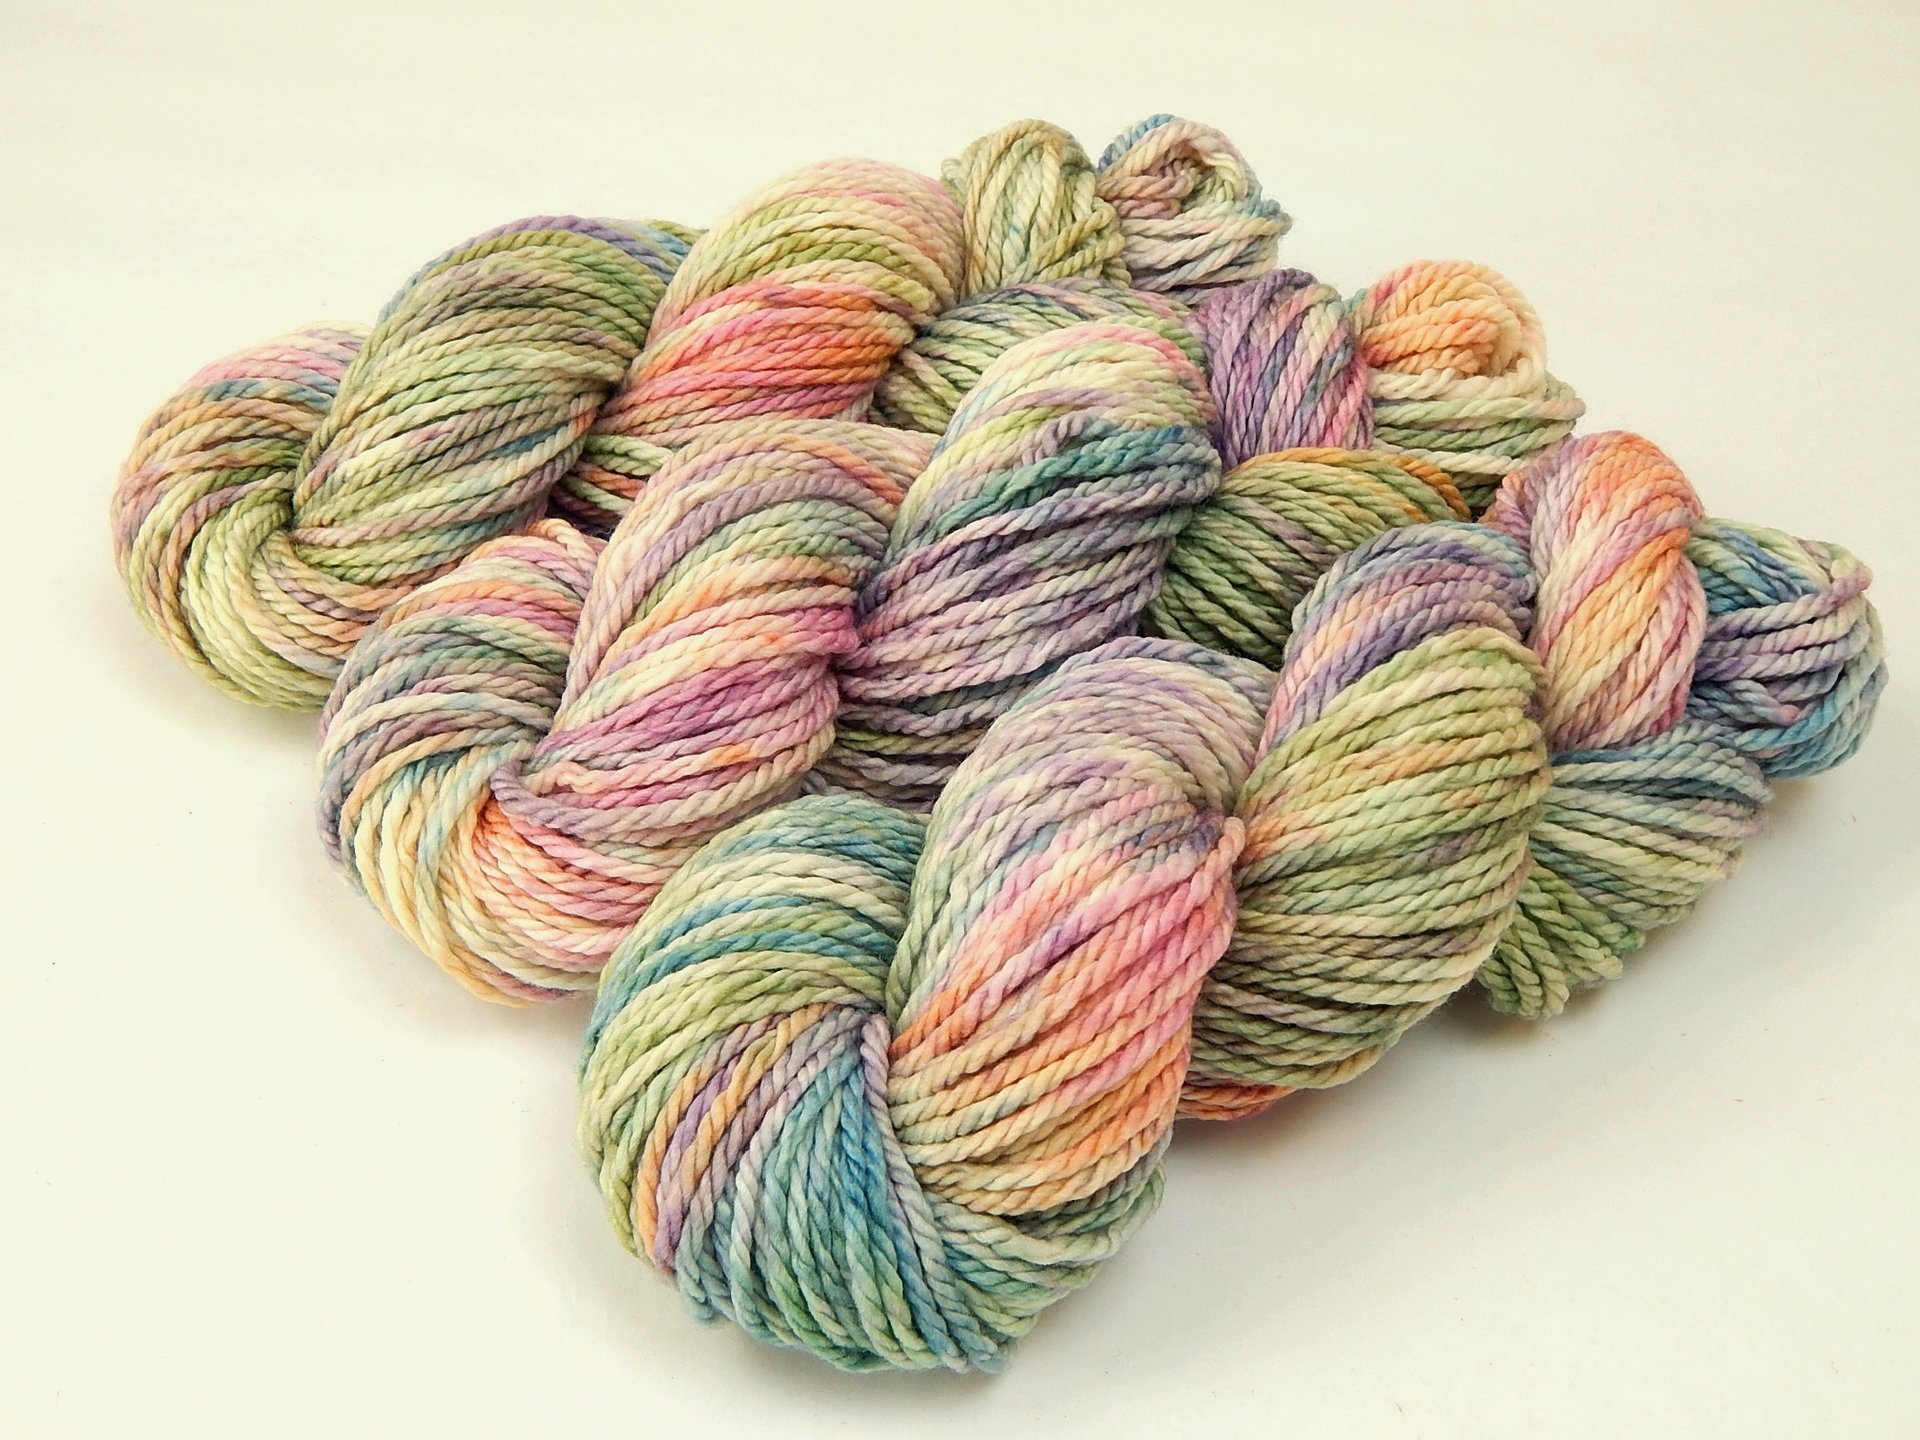 Hand Dyed Yarn, Bulky Weight Superwash Merino Wool - Potluck Pastels - Indie Dyer Blue Green Pink Purple White Speckled Chunky Knitting Yarn